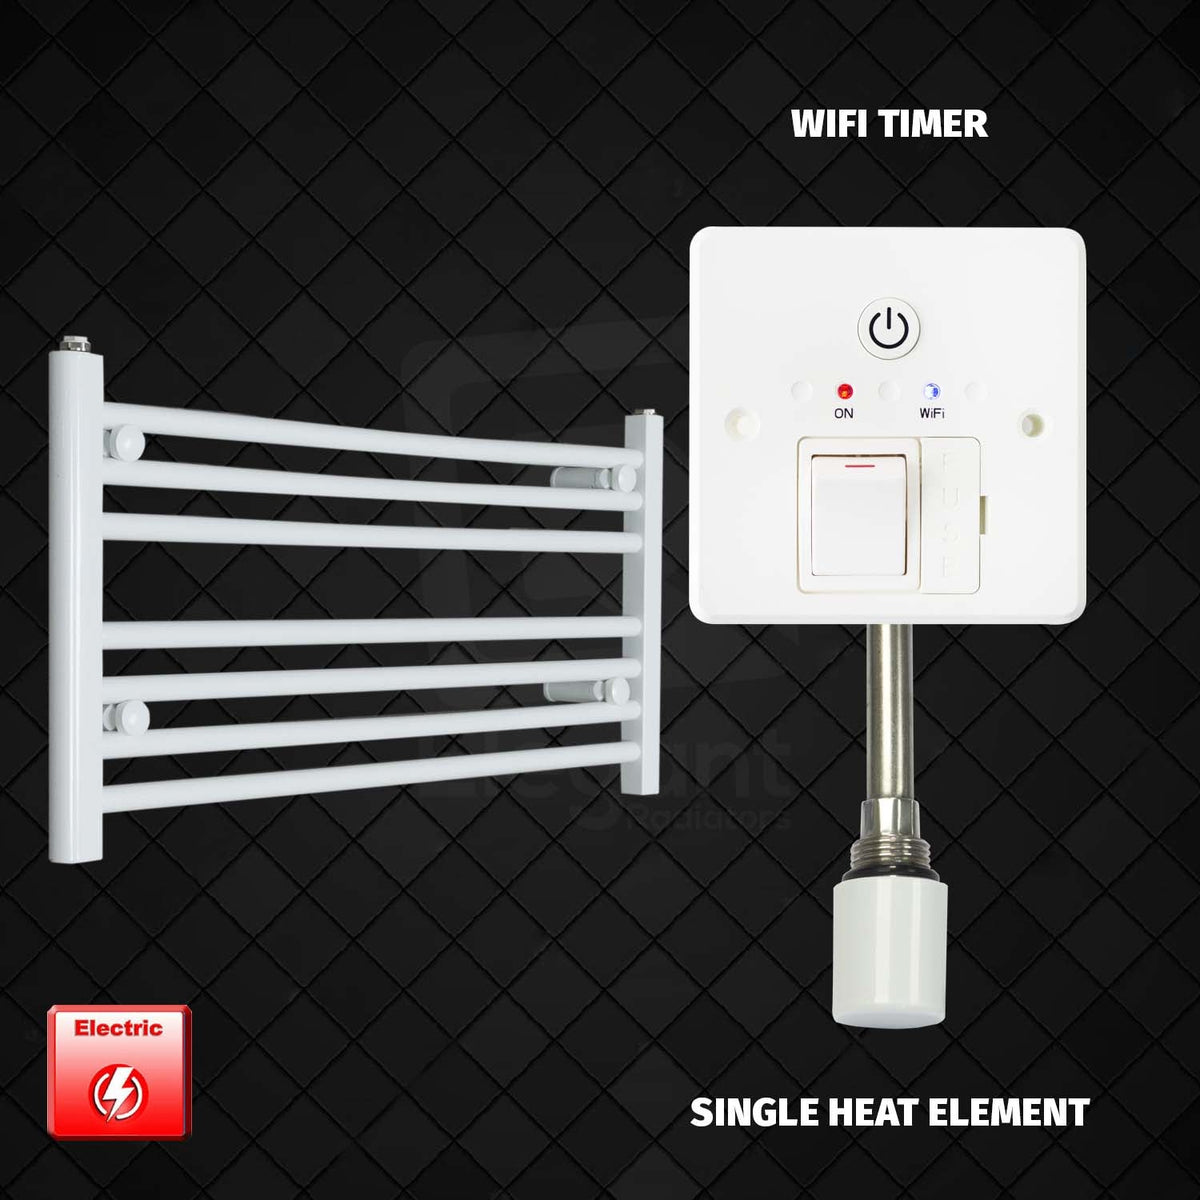 400 mm High 800 mm Wide Pre-Filled Electric Heated Towel Radiator White HTR Single heat element Wifi timer